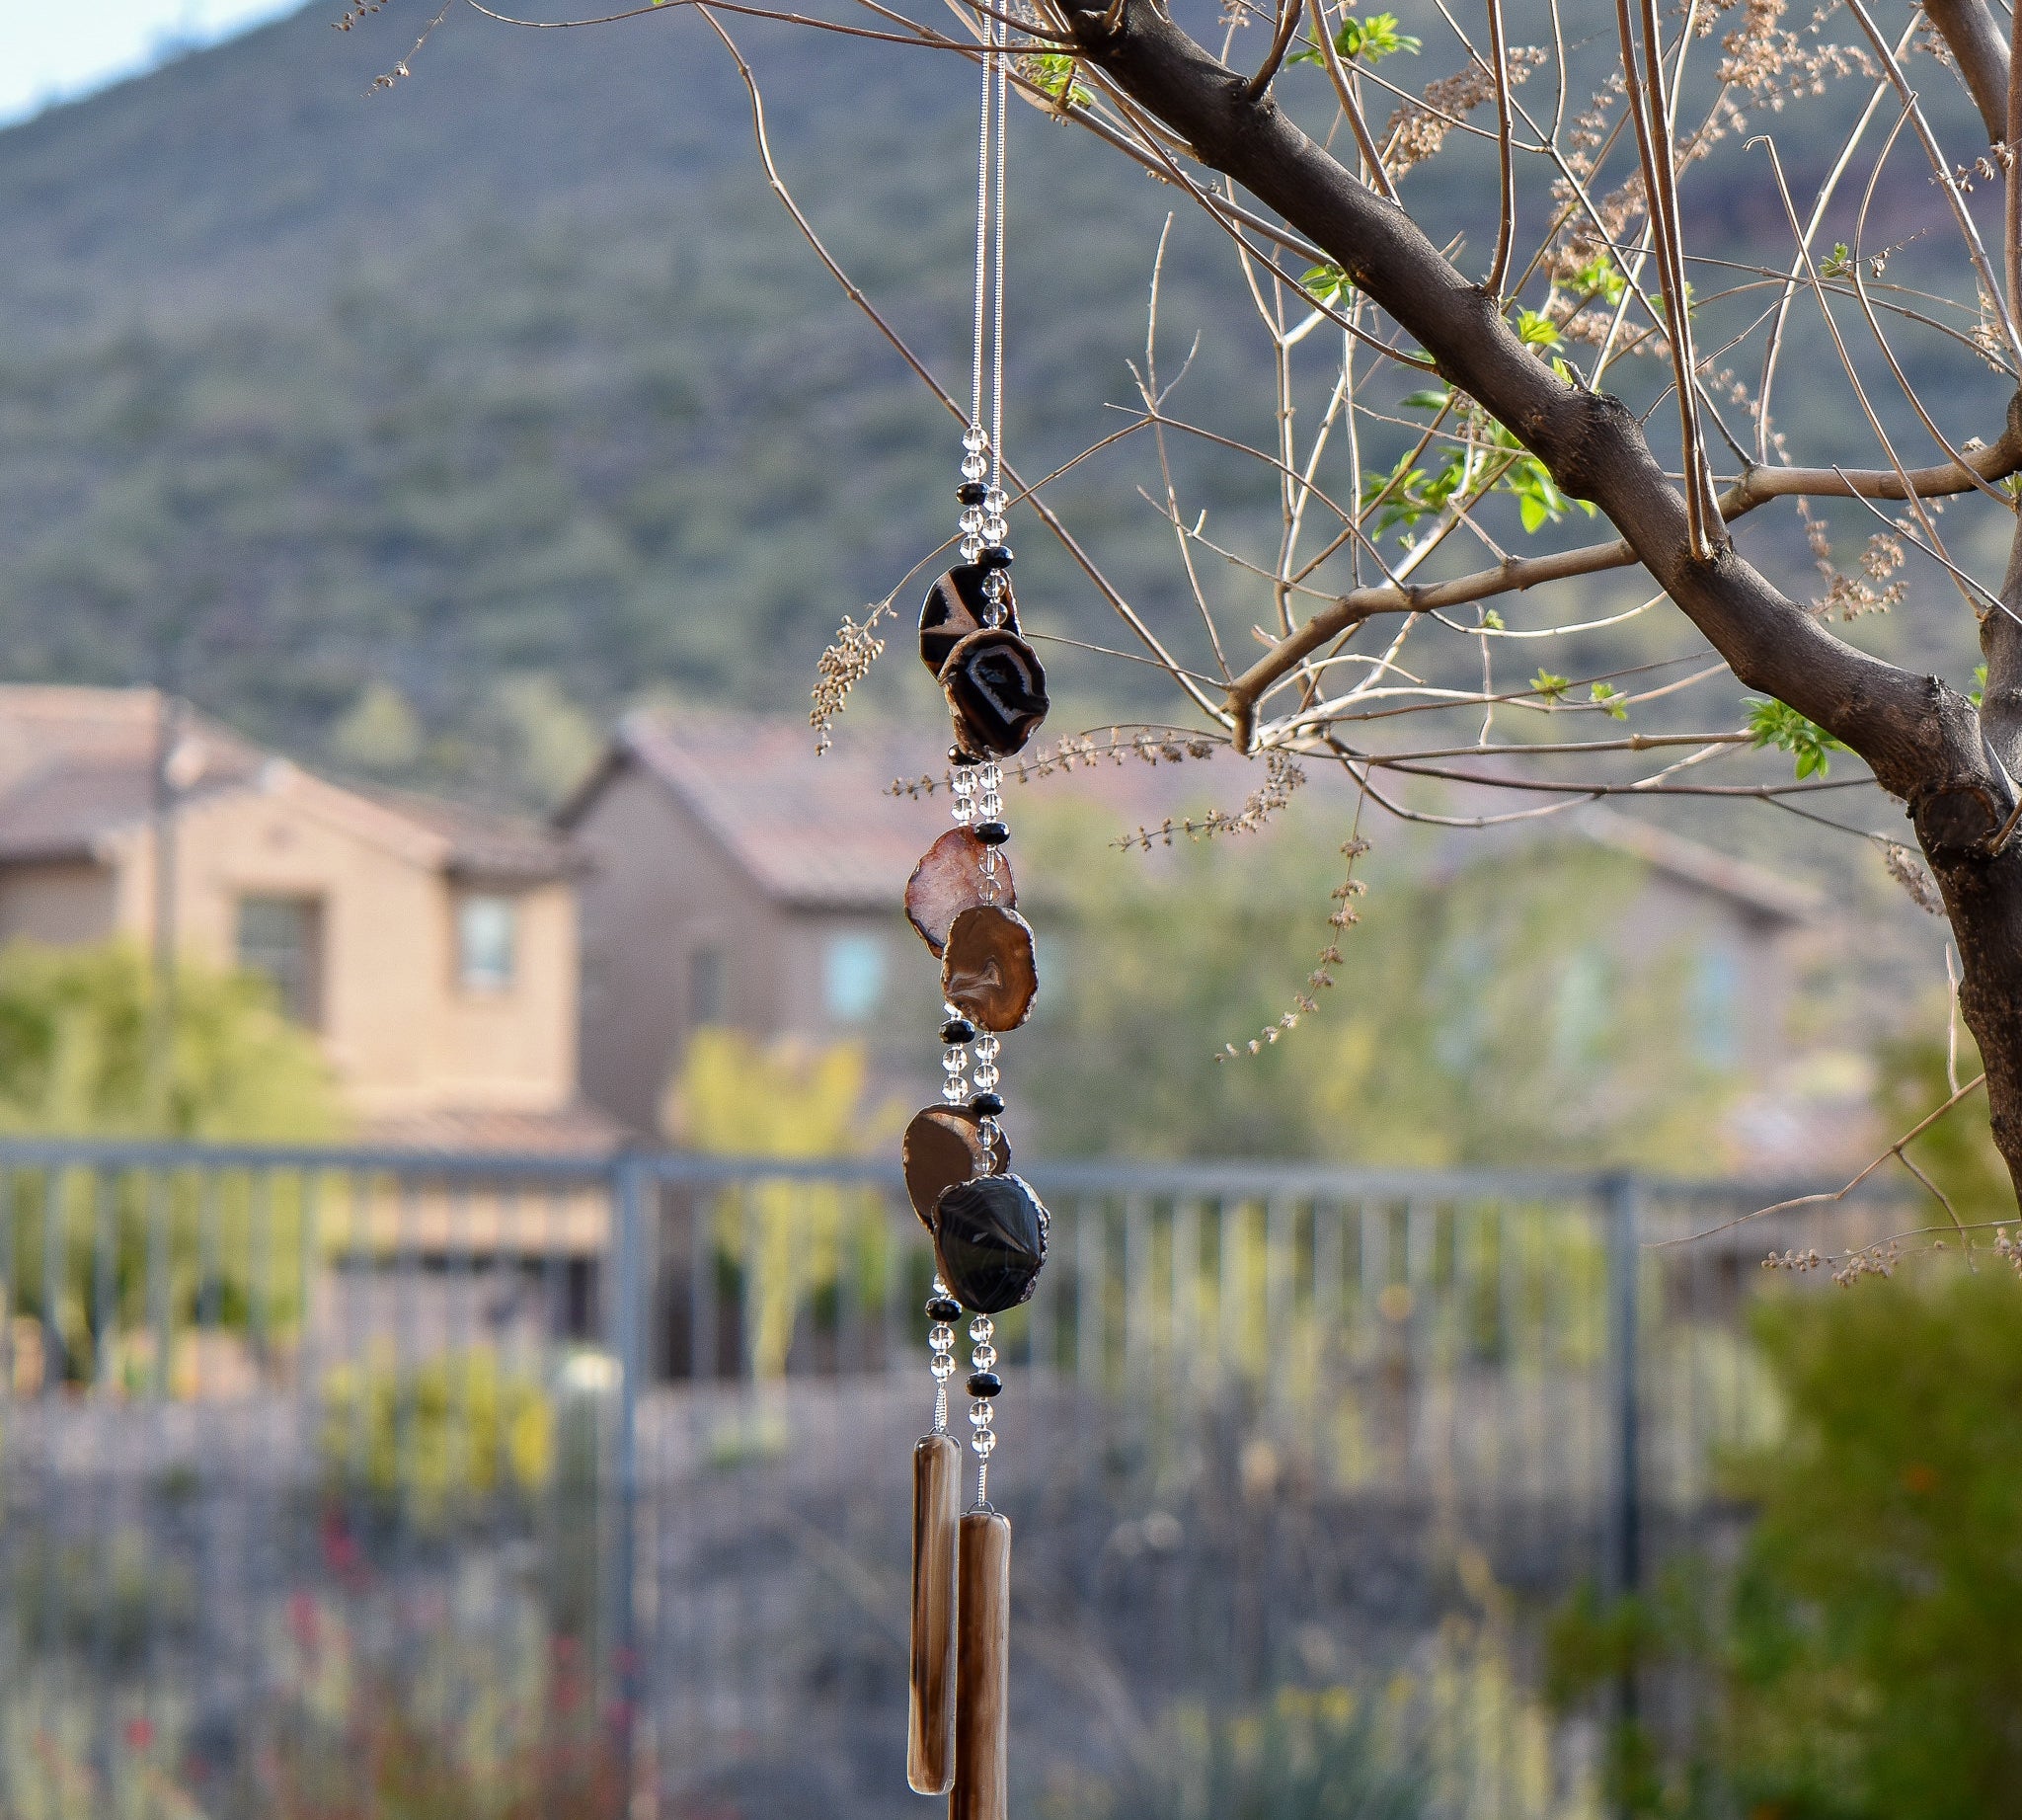 Sliced Black Agate Sun-Catching Glass Wind Chime for the Patio or Garden - Outdoor Decor Gift for the Home